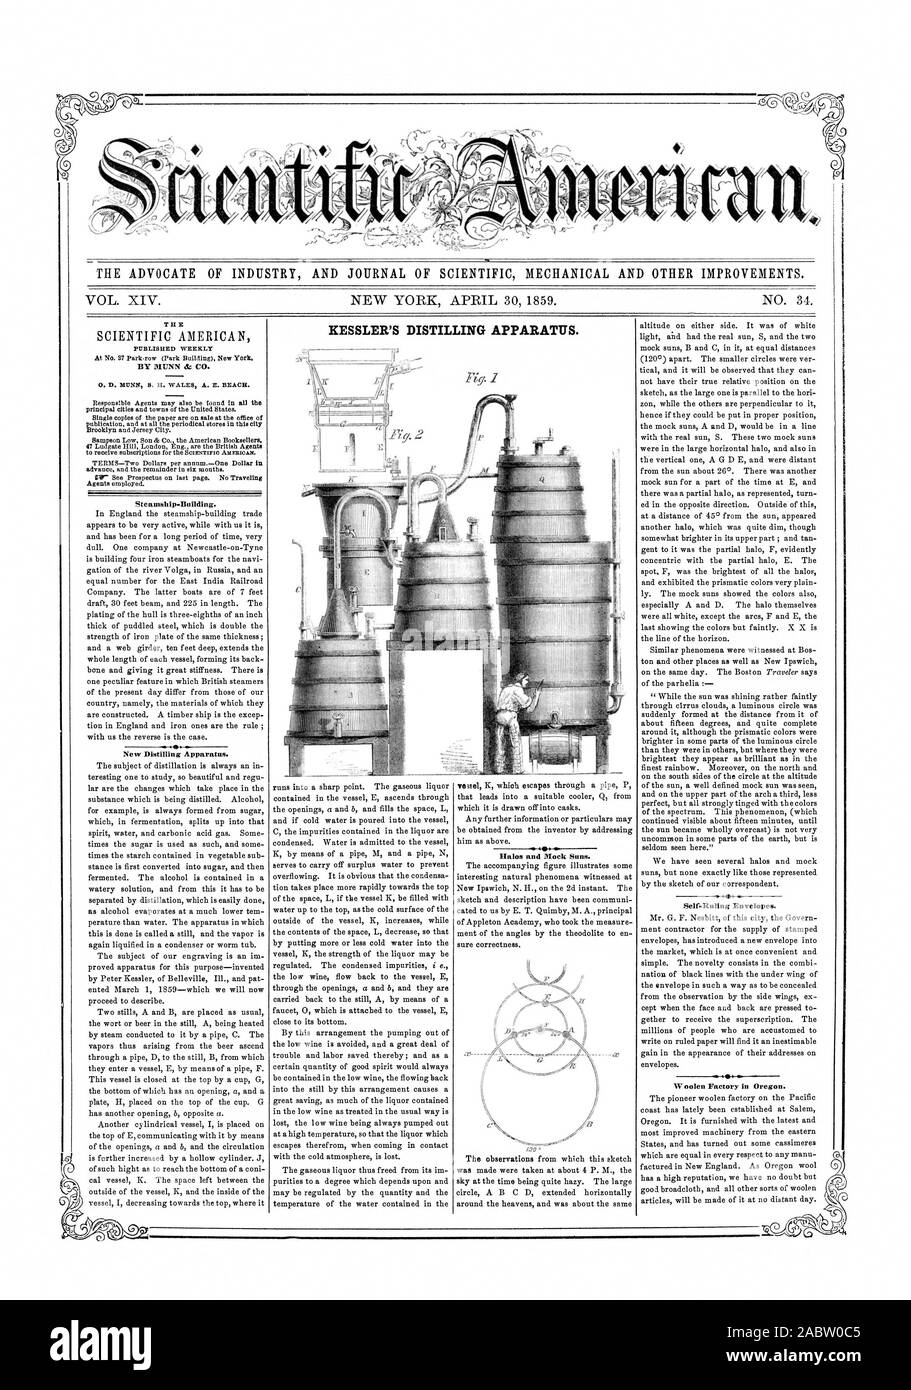 THE ADVOCATE OF INDUSTRY AND JOURNAL OF SCIENTIFIC MECHANICAL AND OTHER IMPROVEMENTS. KESSLER'S DISTILLING APPARATUS., scientific american, 1859-04-30 Stock Photo